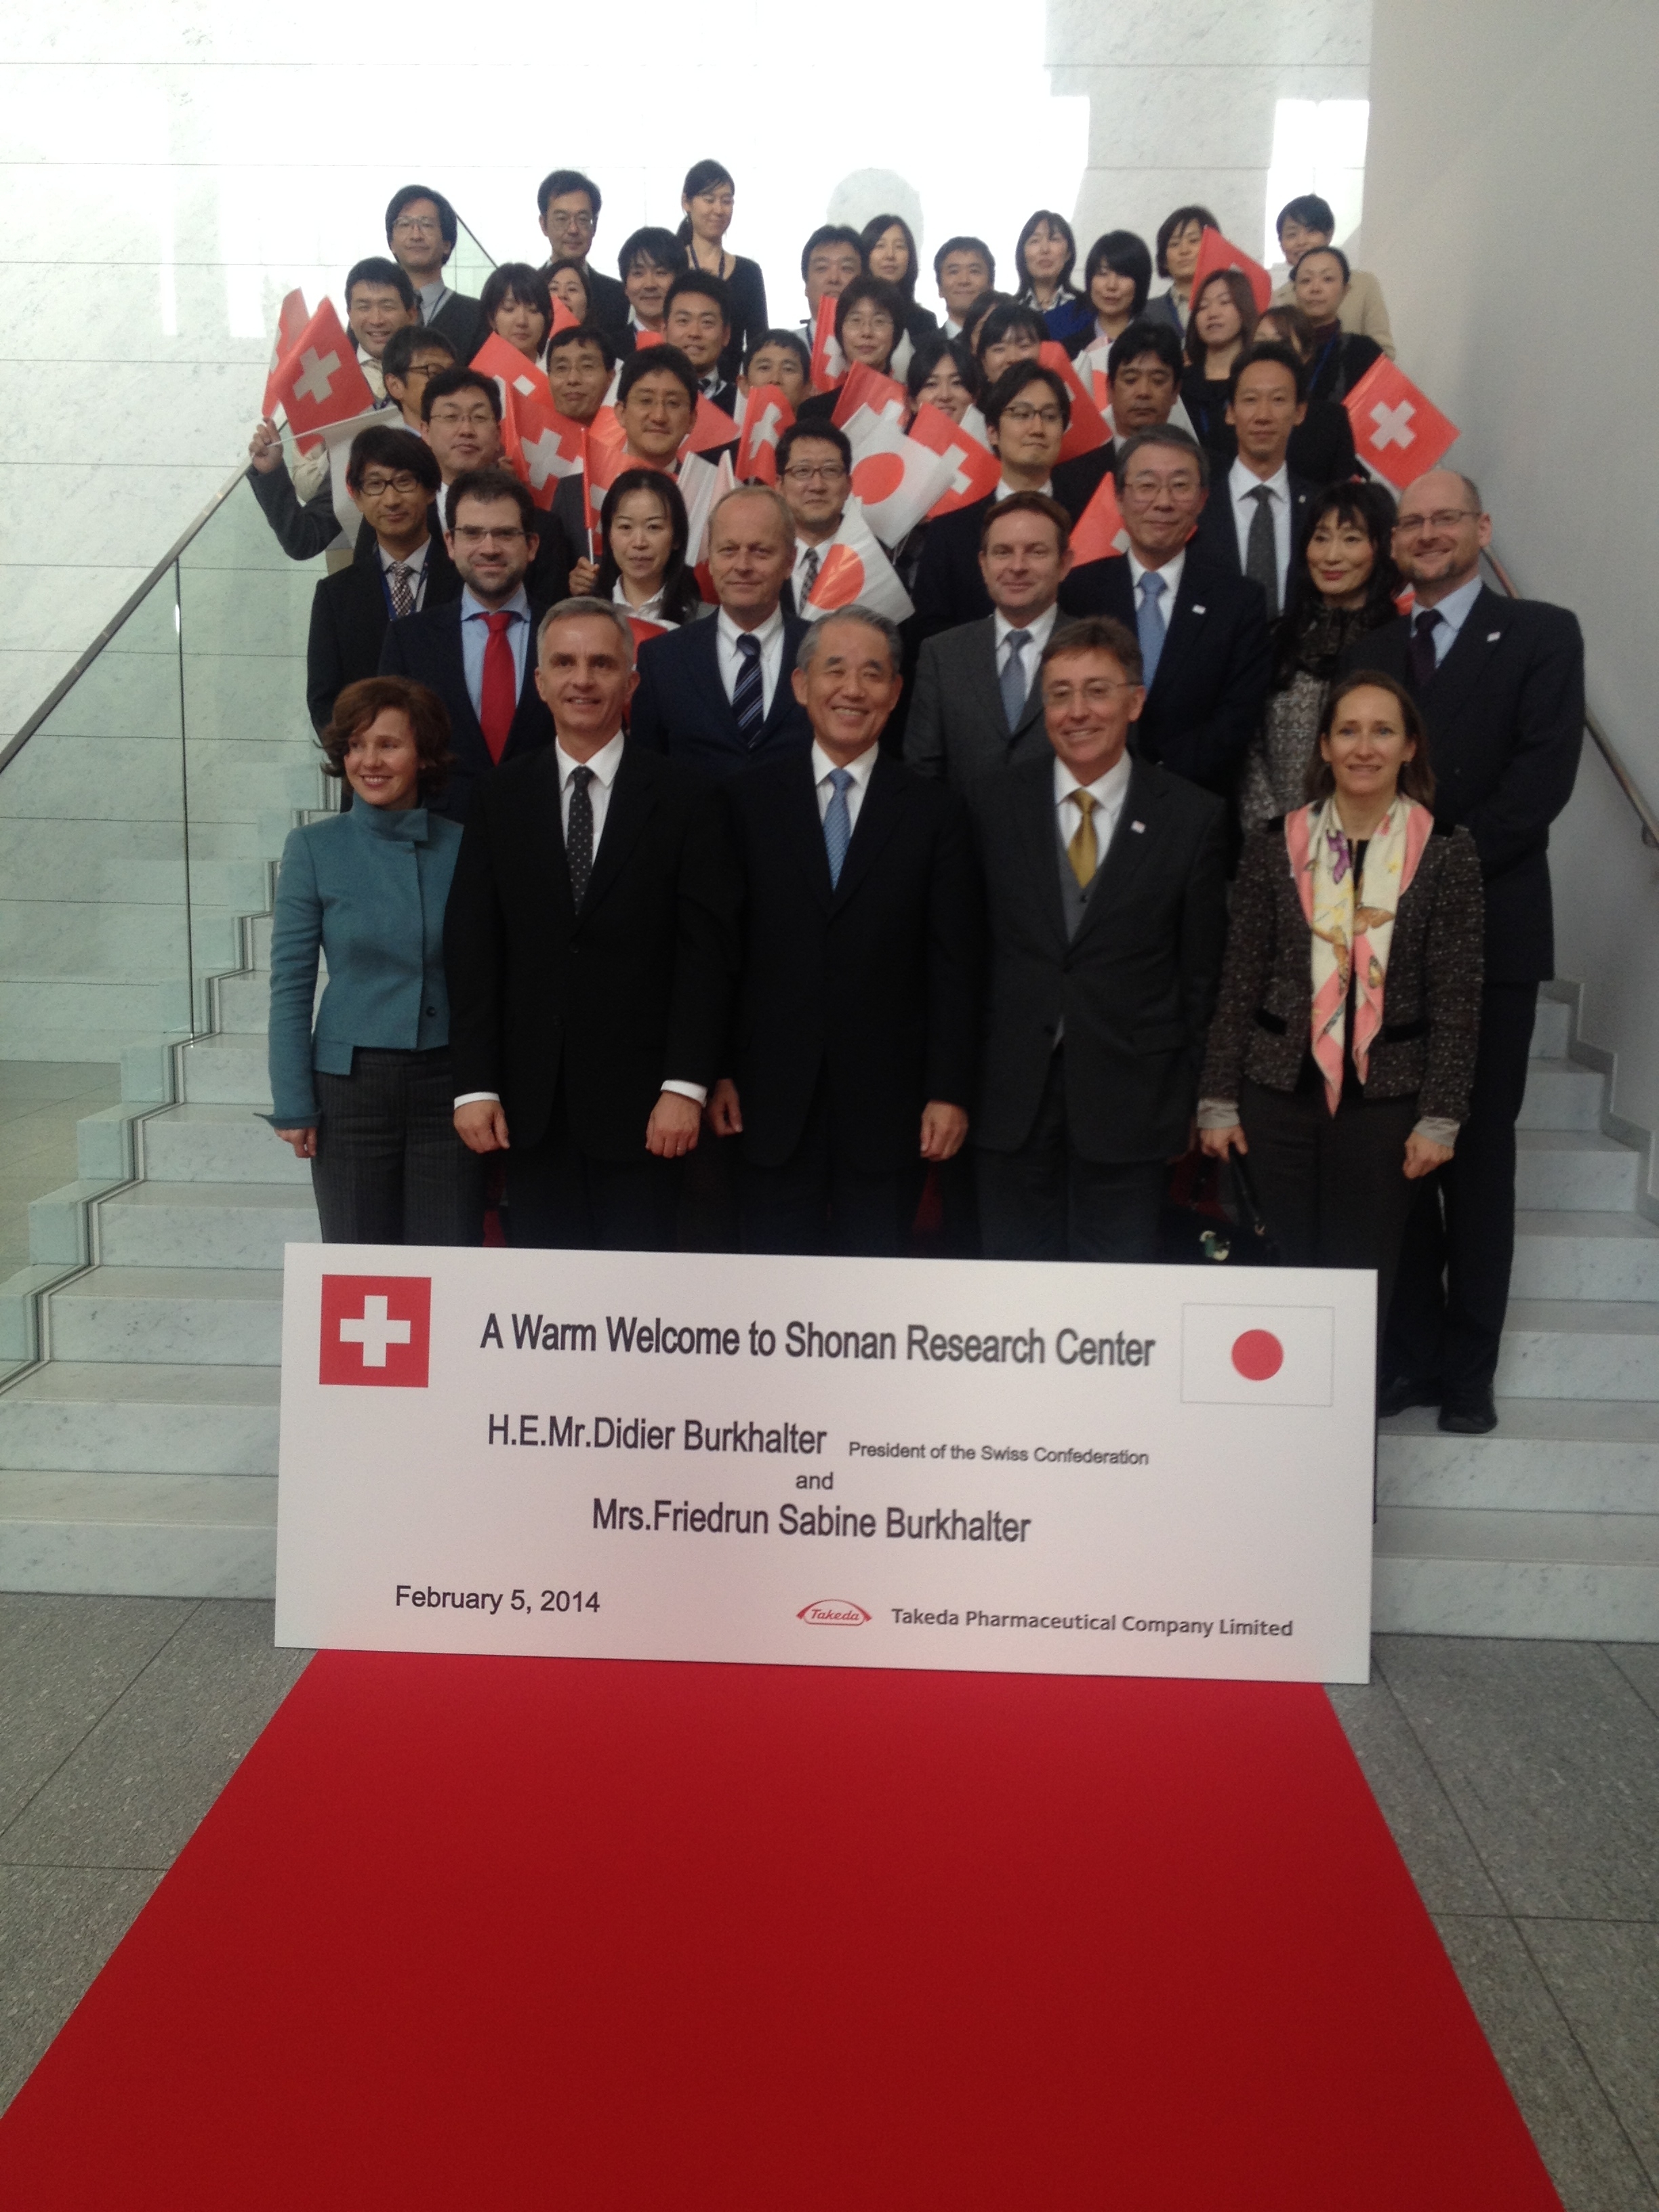 President Didier Burkhalter with his wife, Friedrun Sabine Burkhalter, in the research center of the Takeda company in Kamakura (Japan) together with employees of the center.